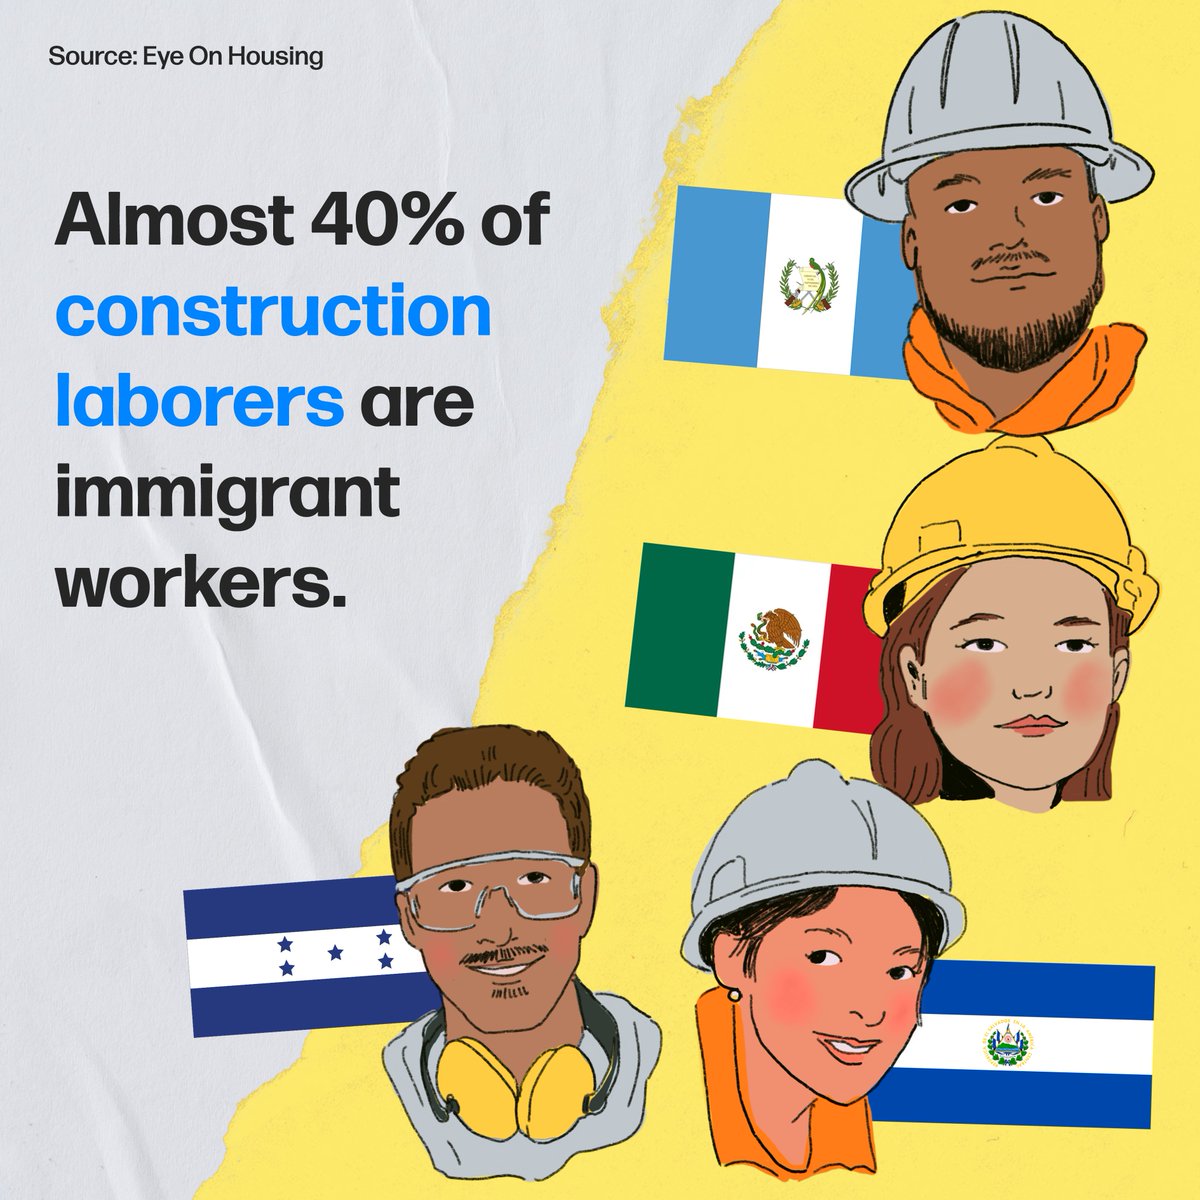 Did you know? Immigrant workers make up a staggering 40% of construction laborers in the US. The Key Bridge tragedy serves as a poignant reminder of their essential role in building our nation. Let's recognize & support immigrant workers, who are the backbone of our country